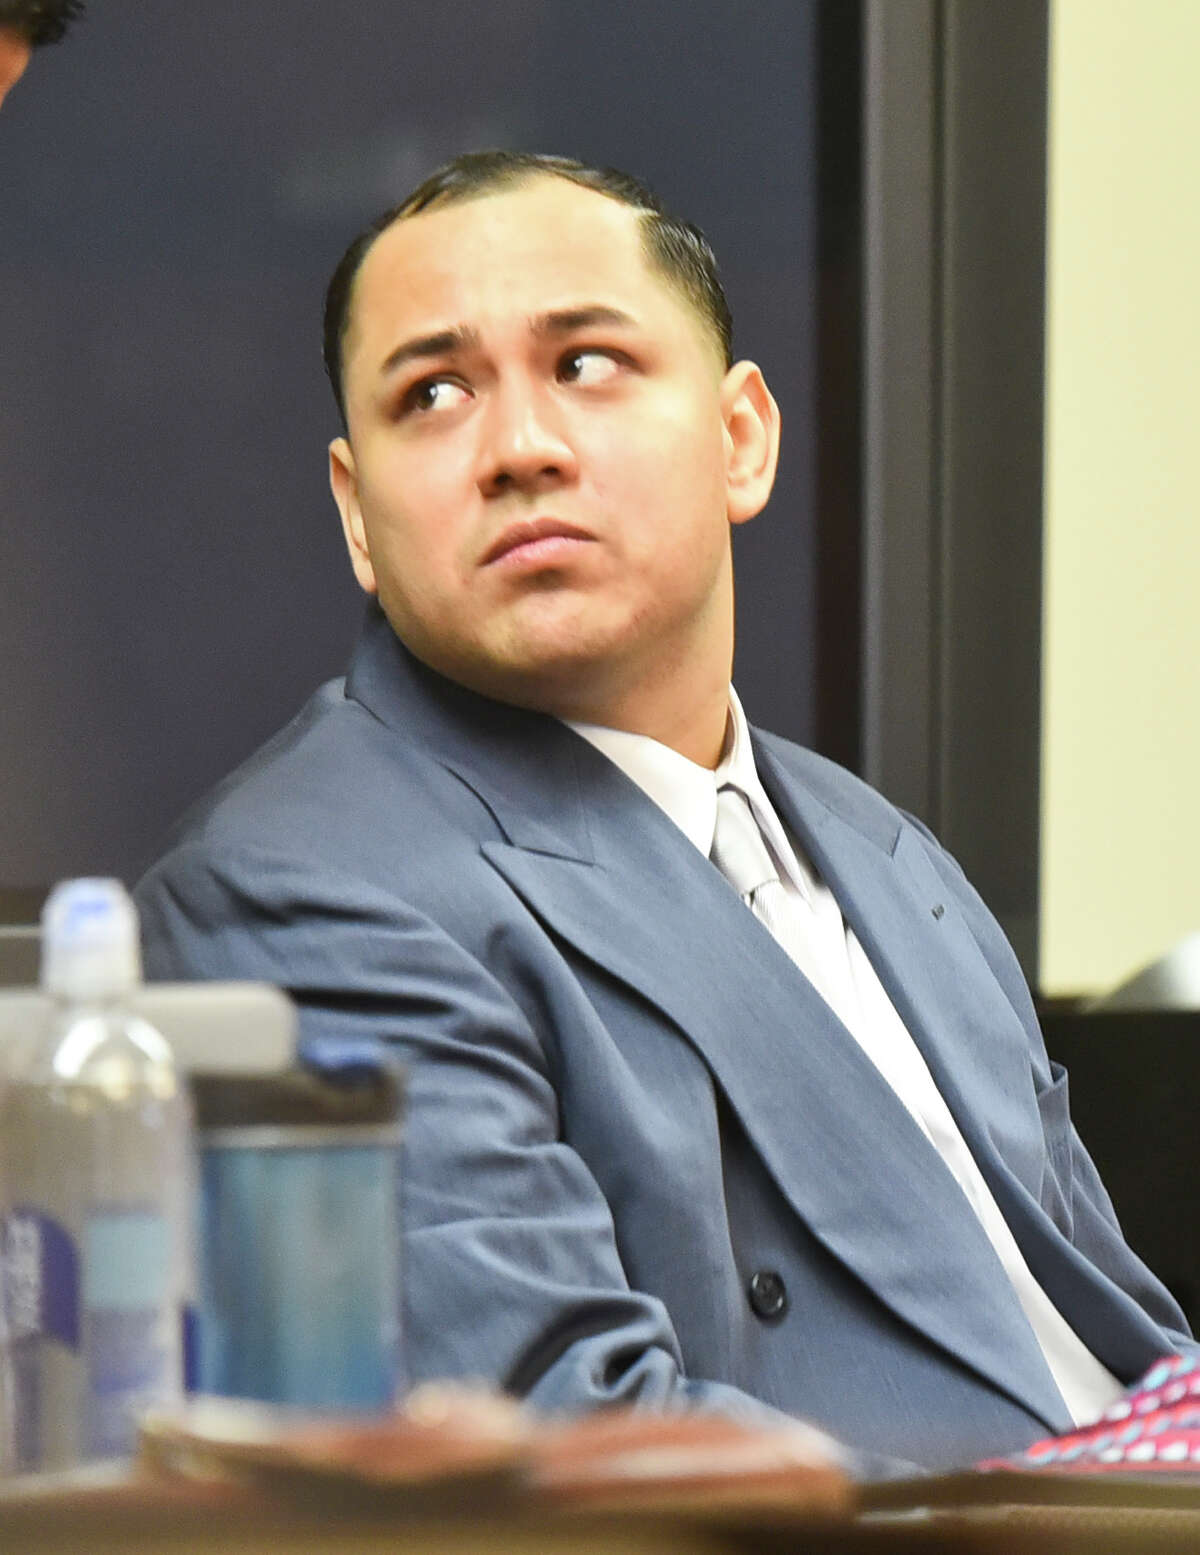 Cristian Yepez waits at the 406th District Courtroom as the defense and prosecution present opening arguments to Judge Oscar Hale on Tuesday, May 16, 2017.